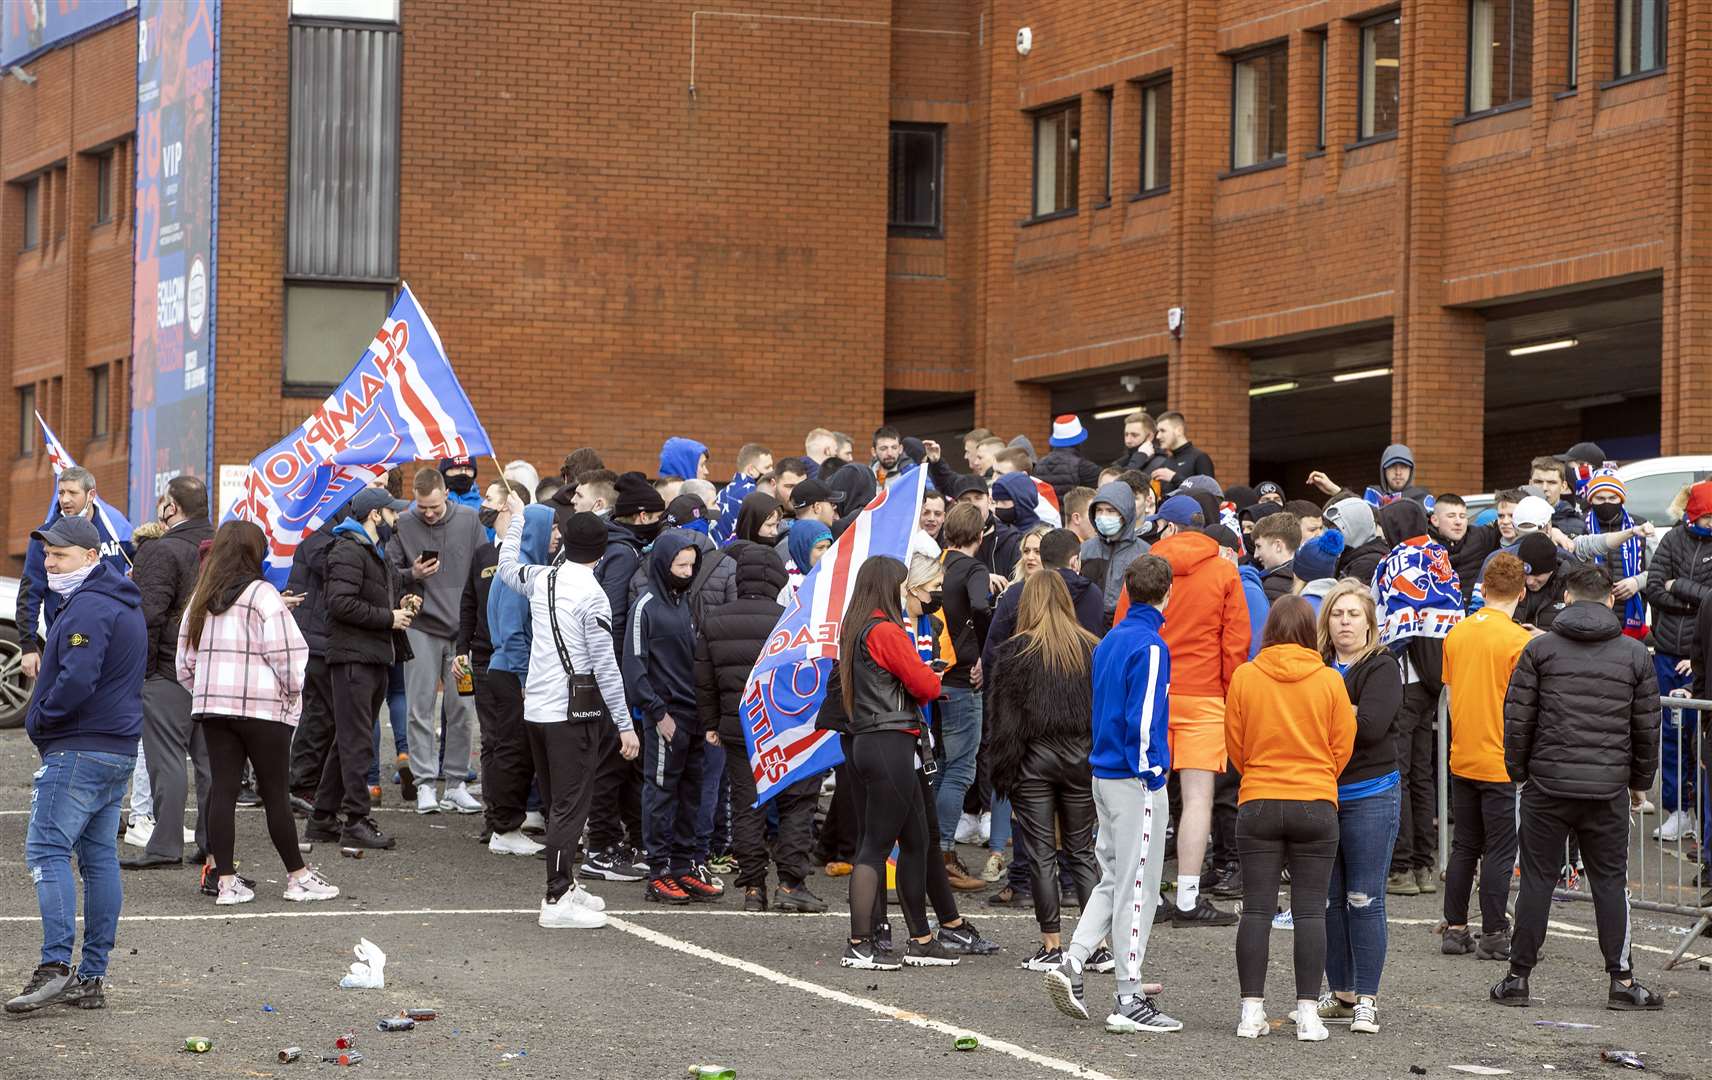 Fans gathered outside Ibrox ahead of the game against St Mirren (Jeff Holmes/PA)